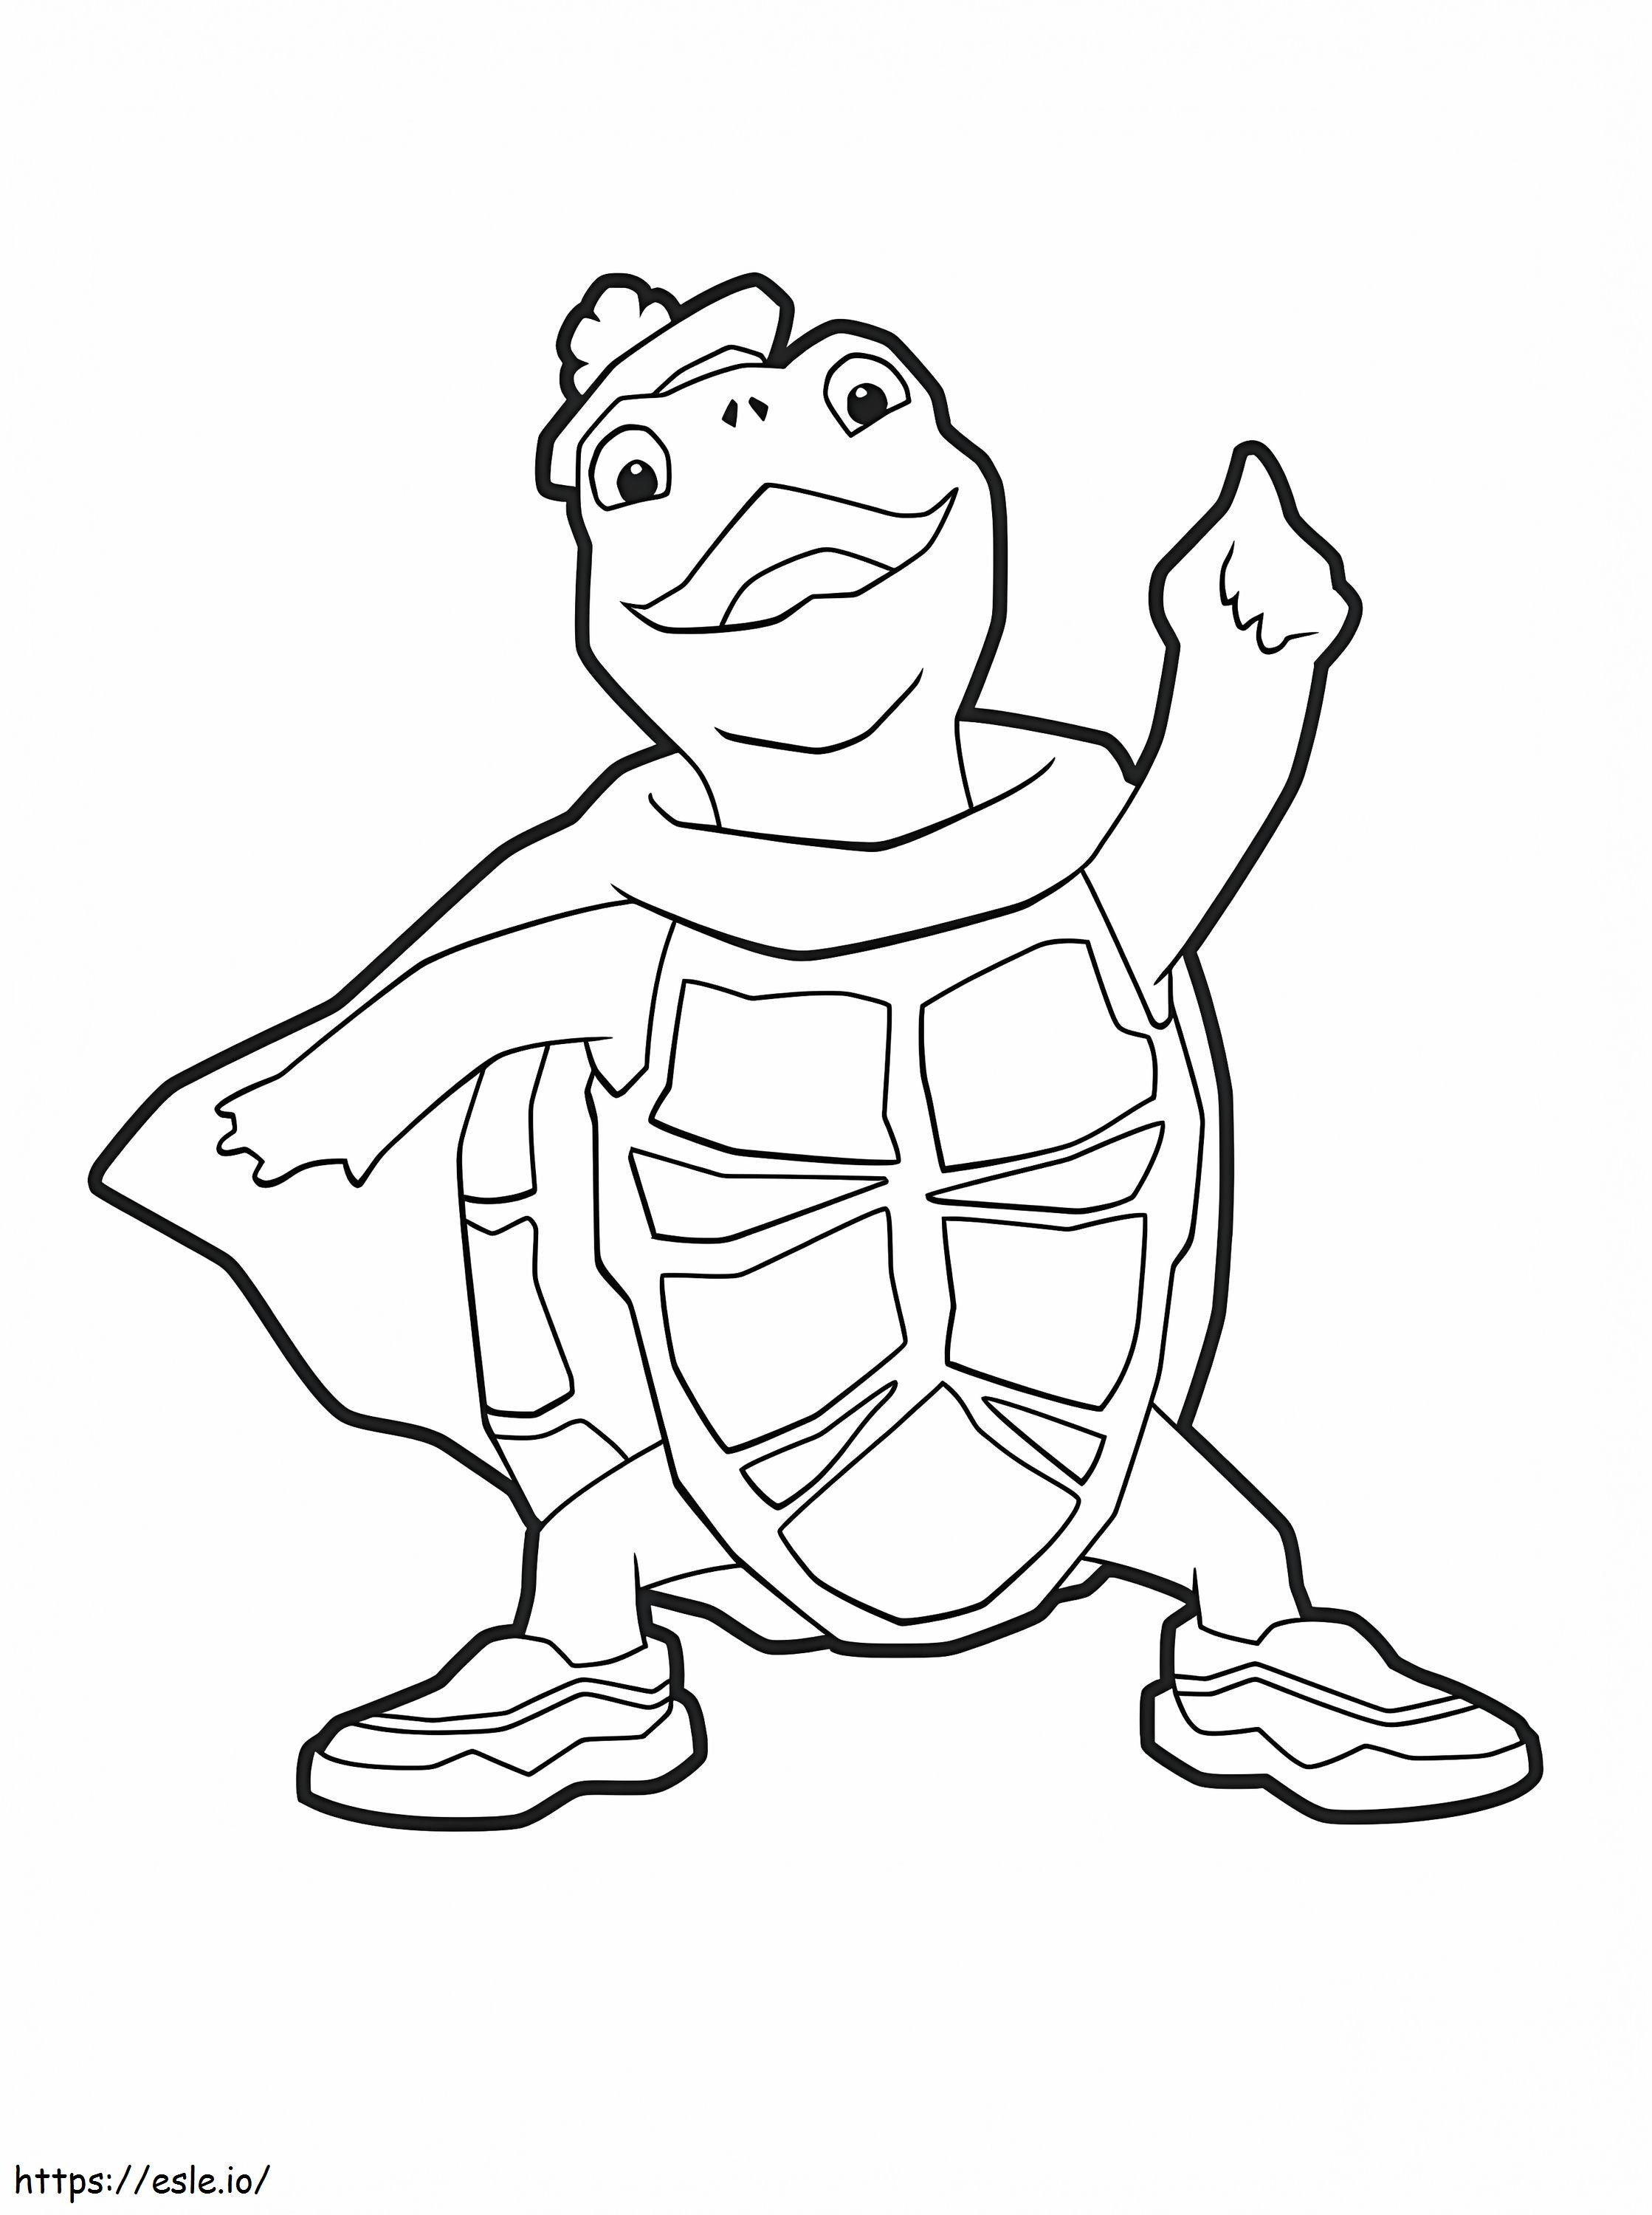 Awesome Turtle 1 coloring page